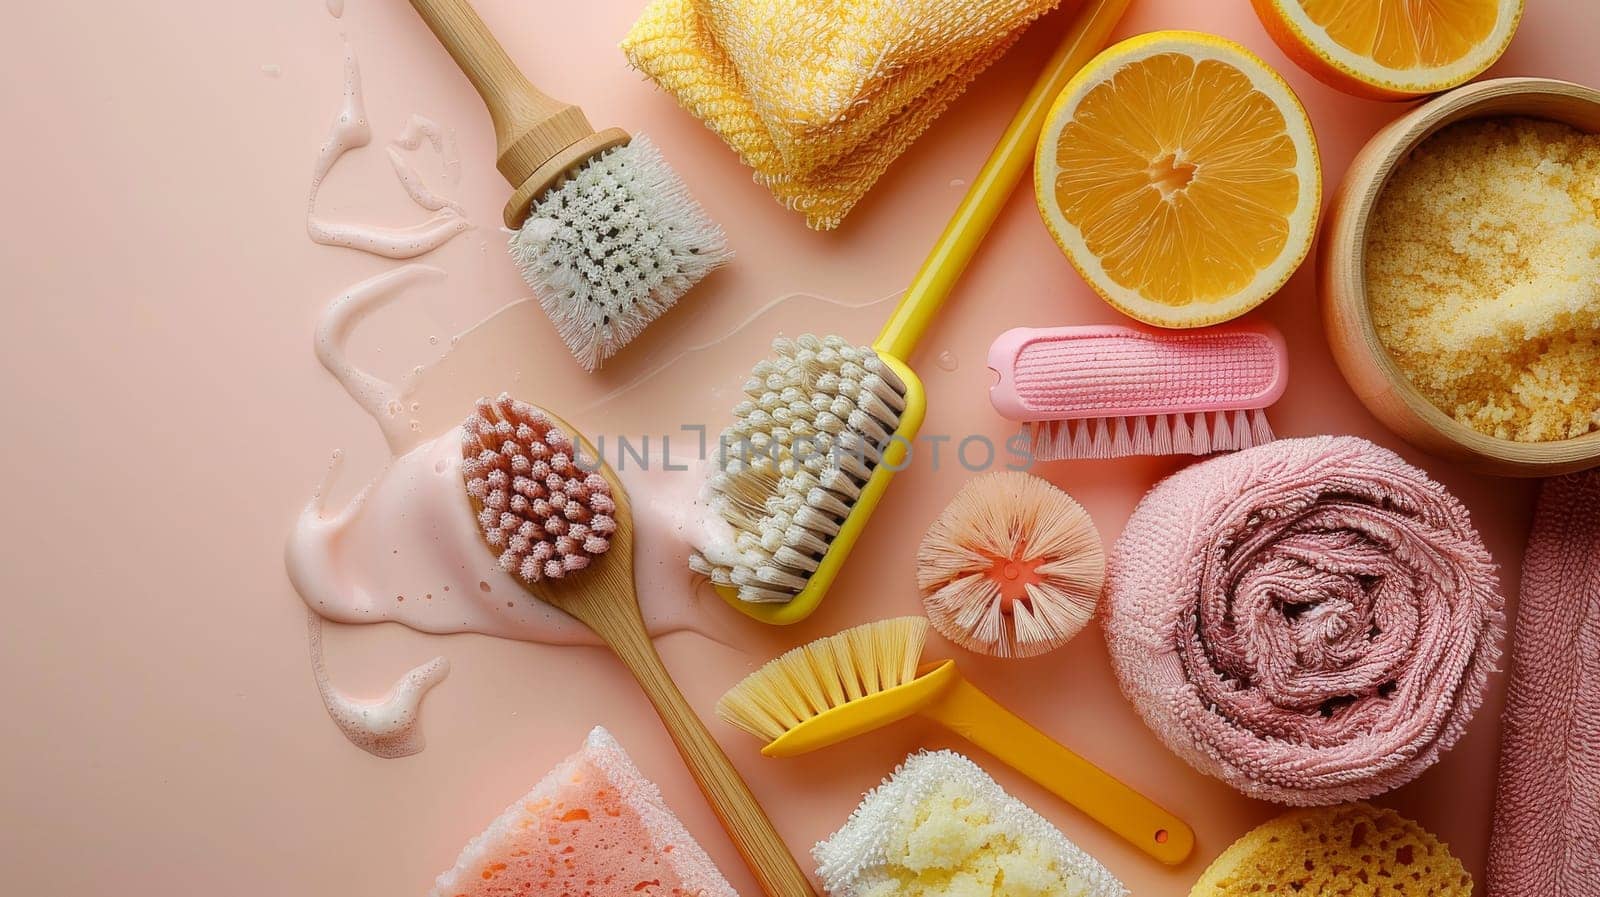 A row of pink cleaning tools including a toothbrush, a scrub brush, and a sponge. Concept of cleanliness and organization